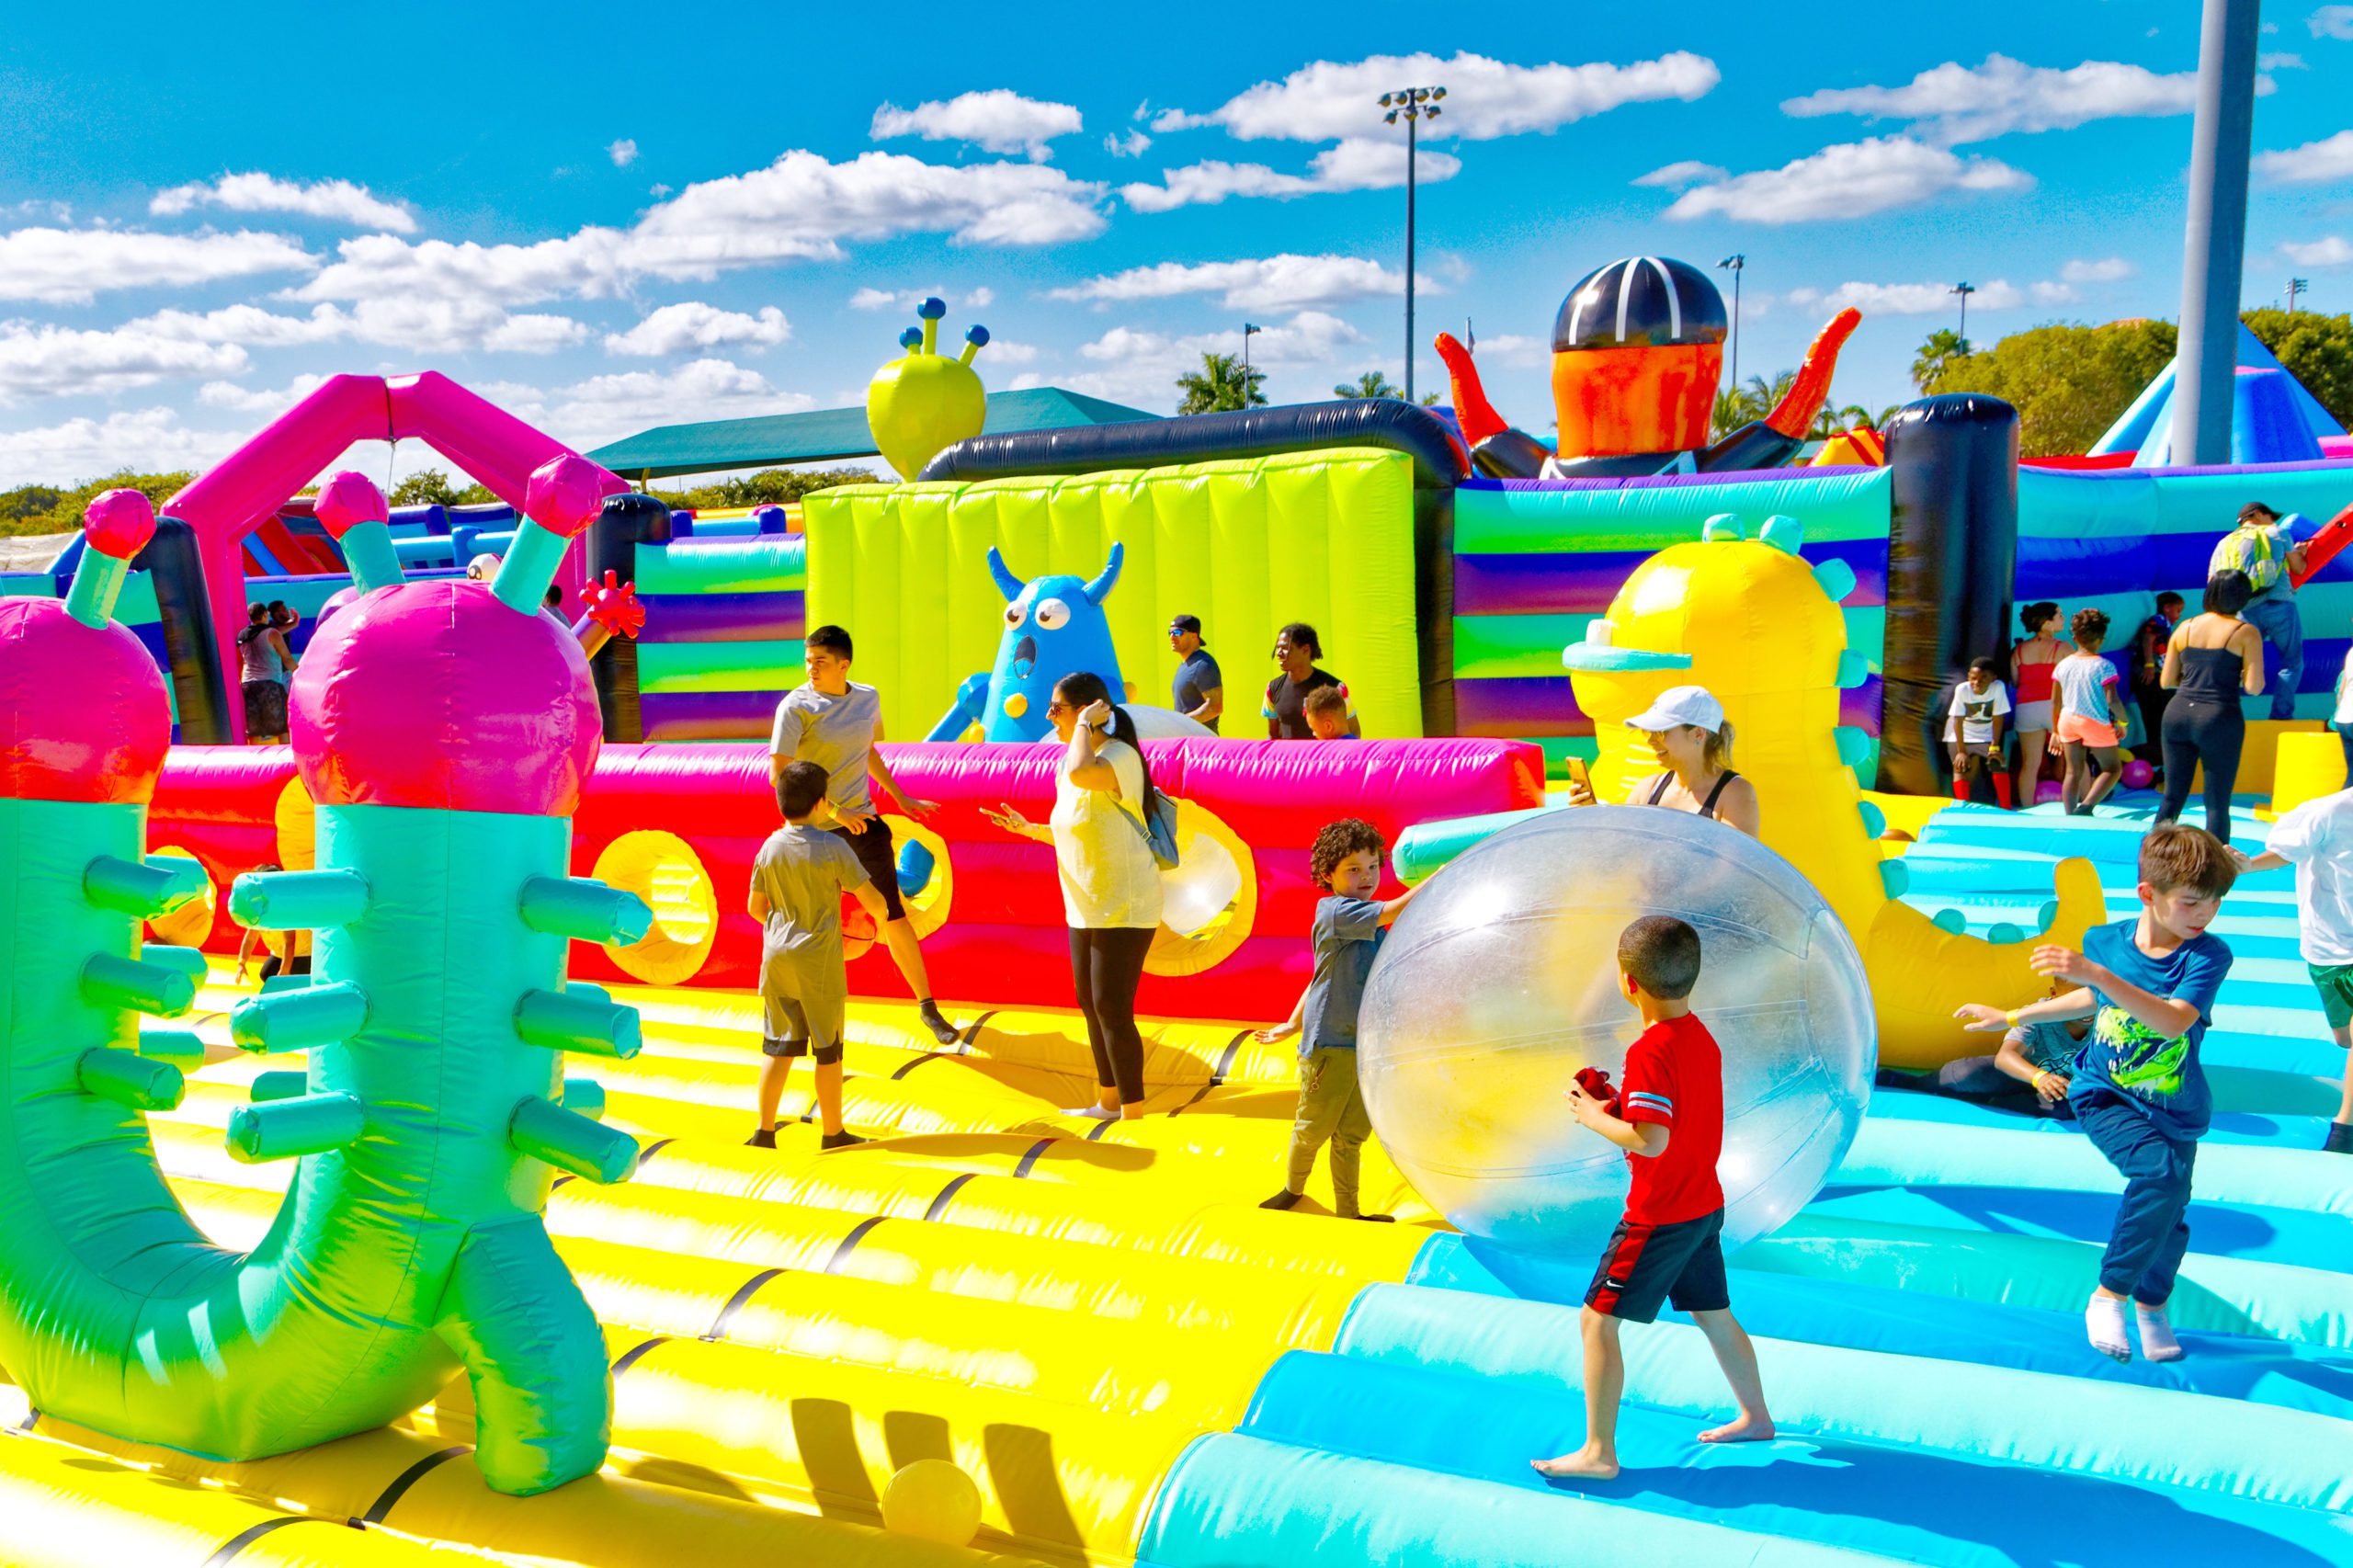 World’s Largest Bounce House Coming to Indianapolis in May